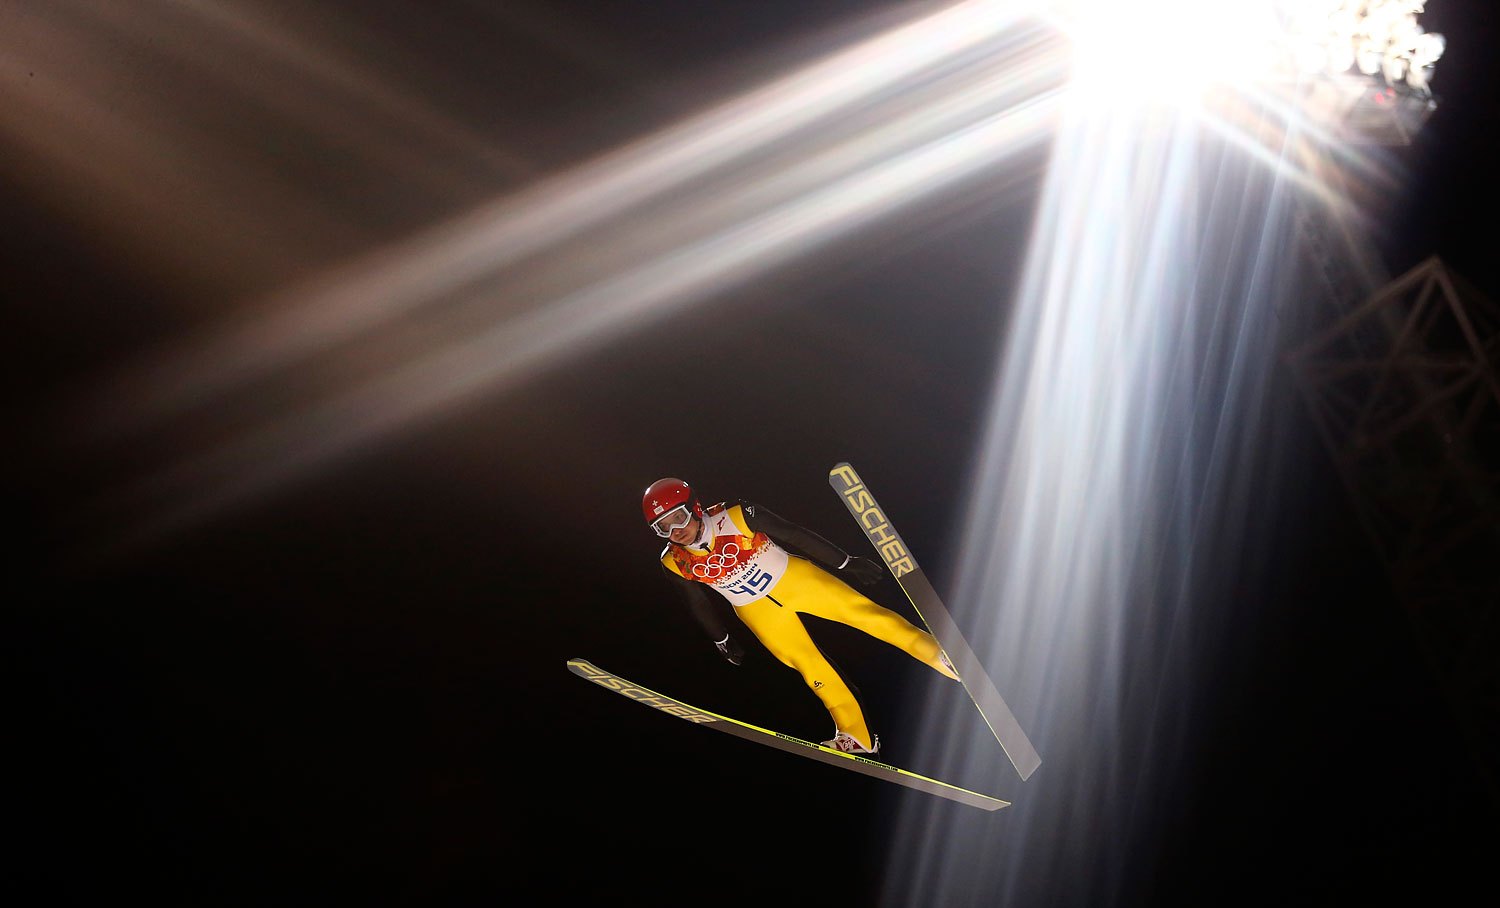 Switzerland's Simon Ammann soars through the air during the first round of the men's ski jumping large hill individual final.